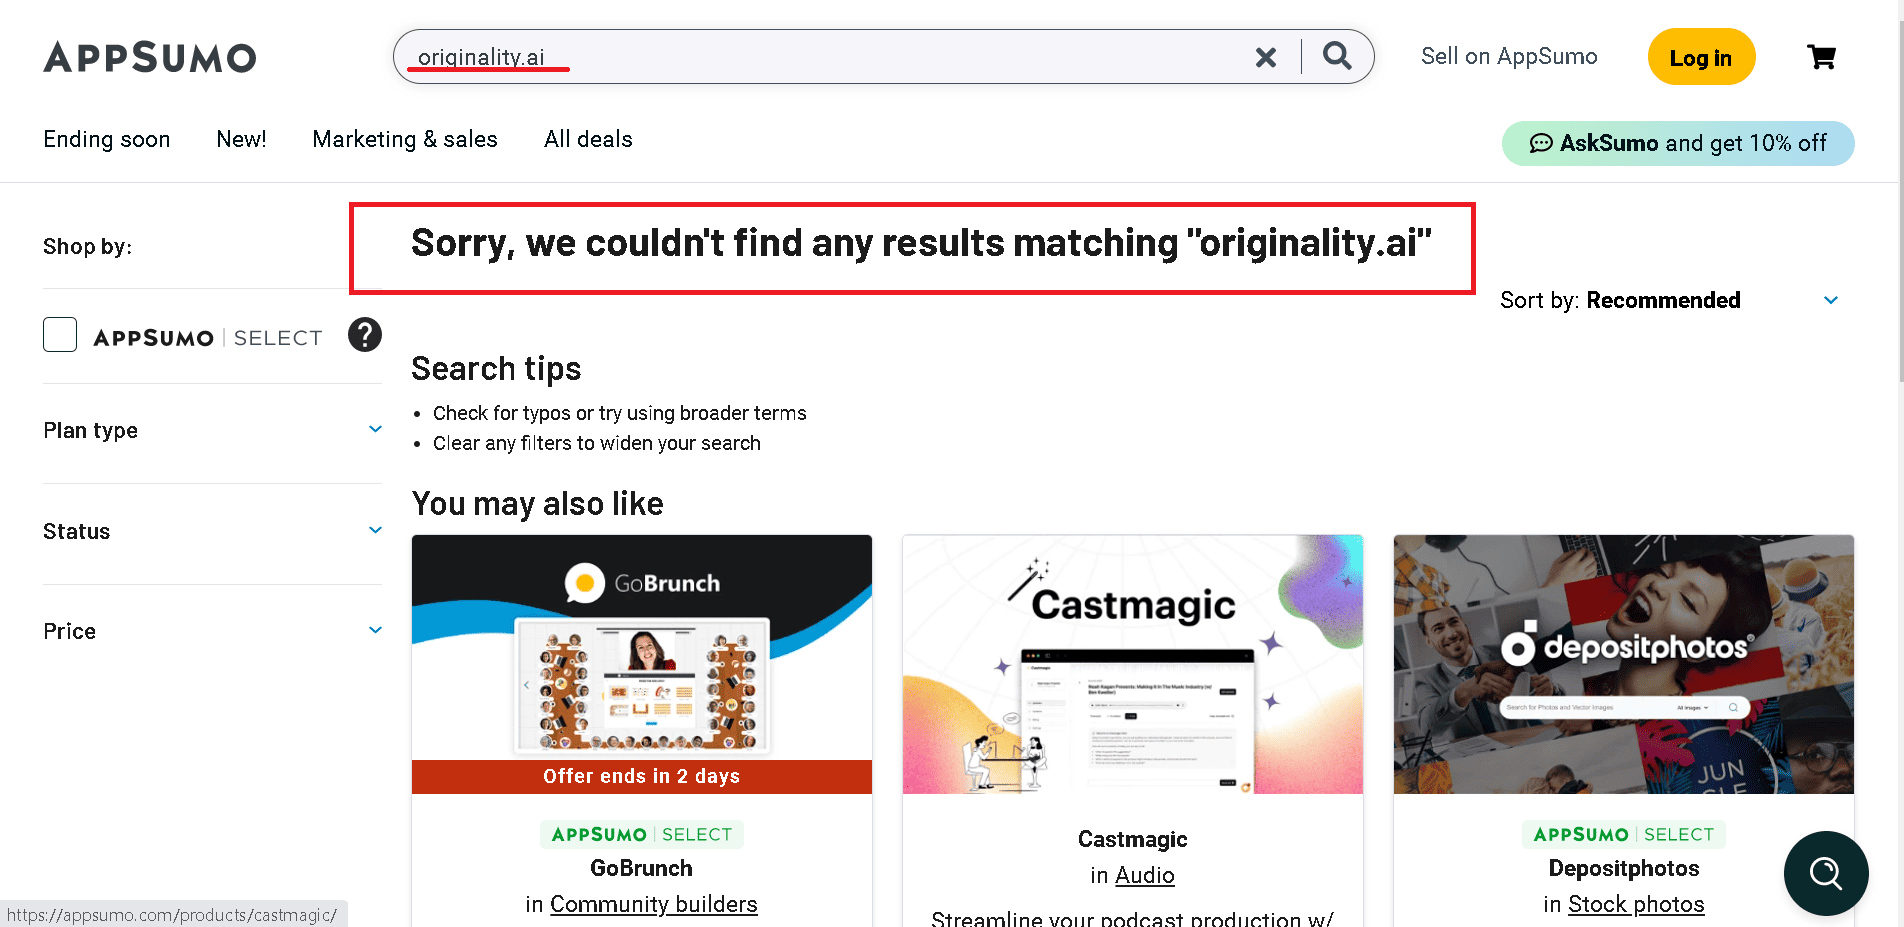 There is no Originality.ai Appsumo deal